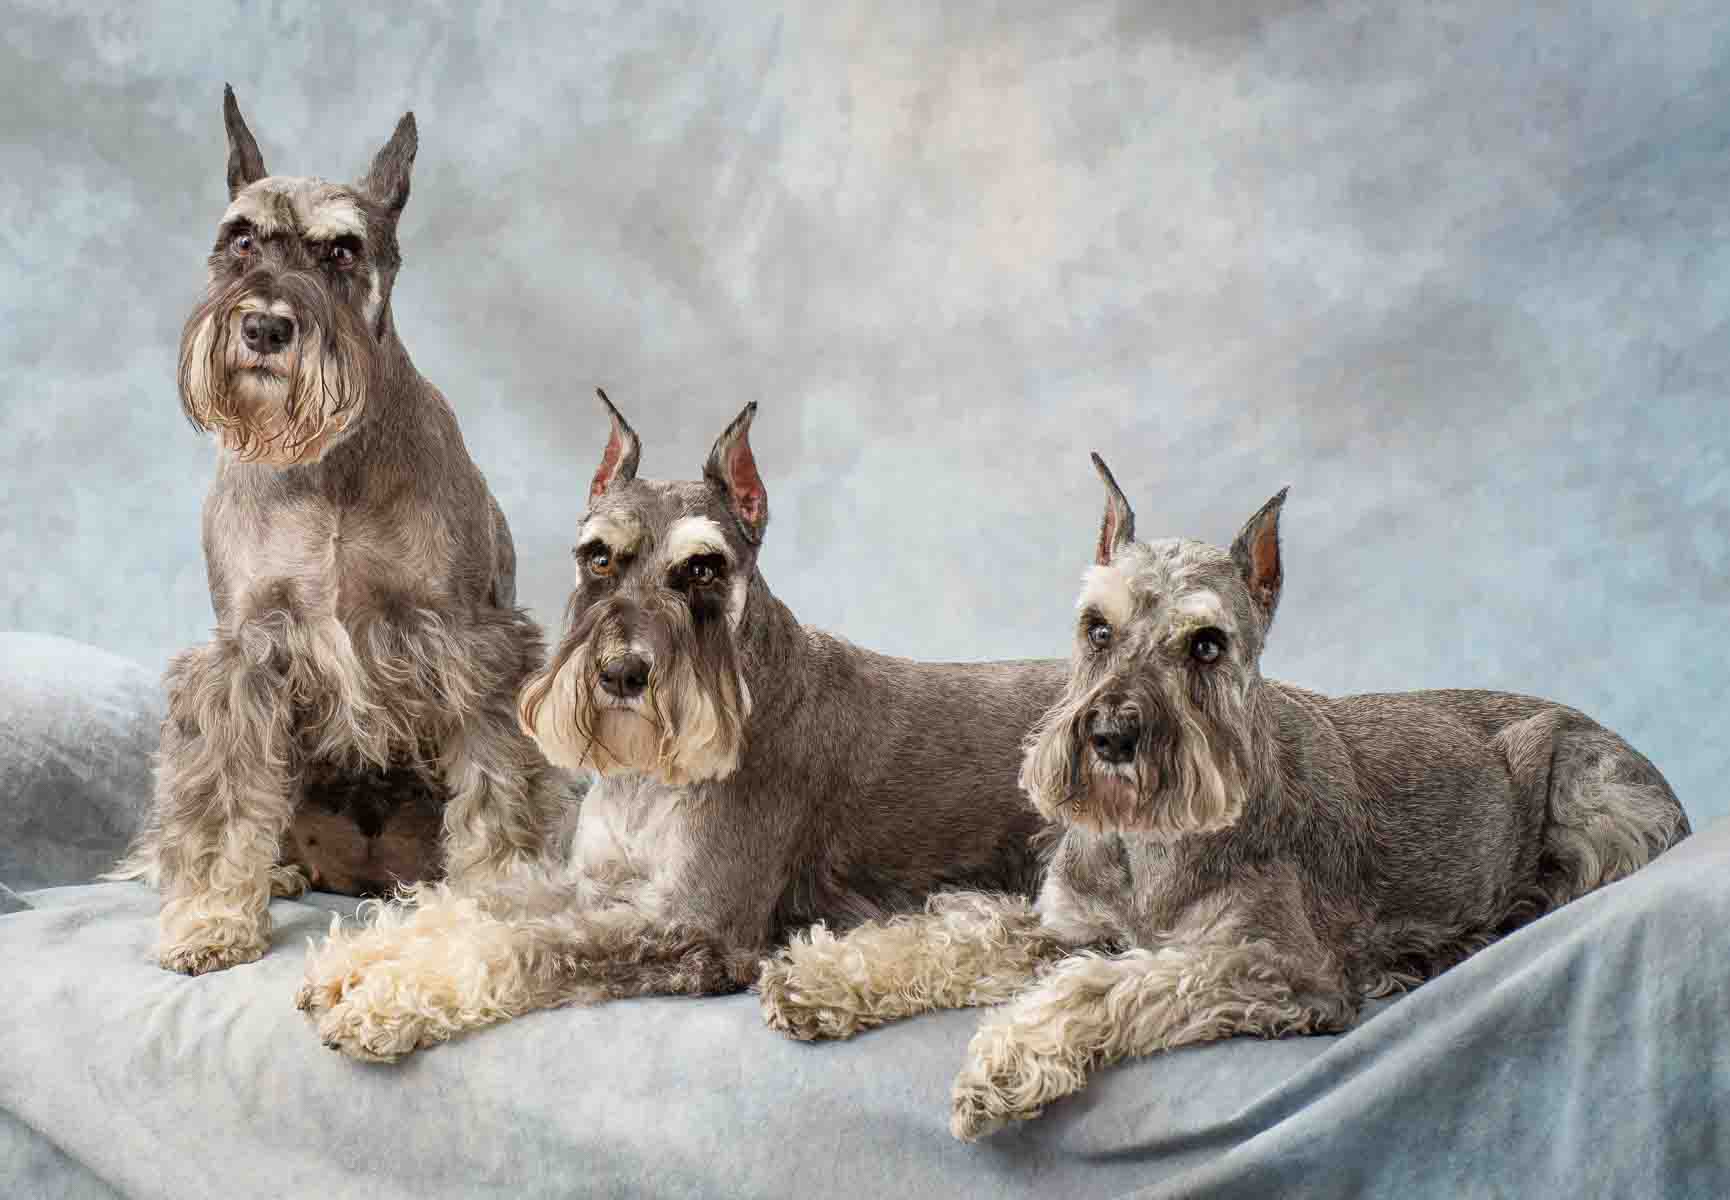 Three dogs are sitting on a blanket and one is laying down.